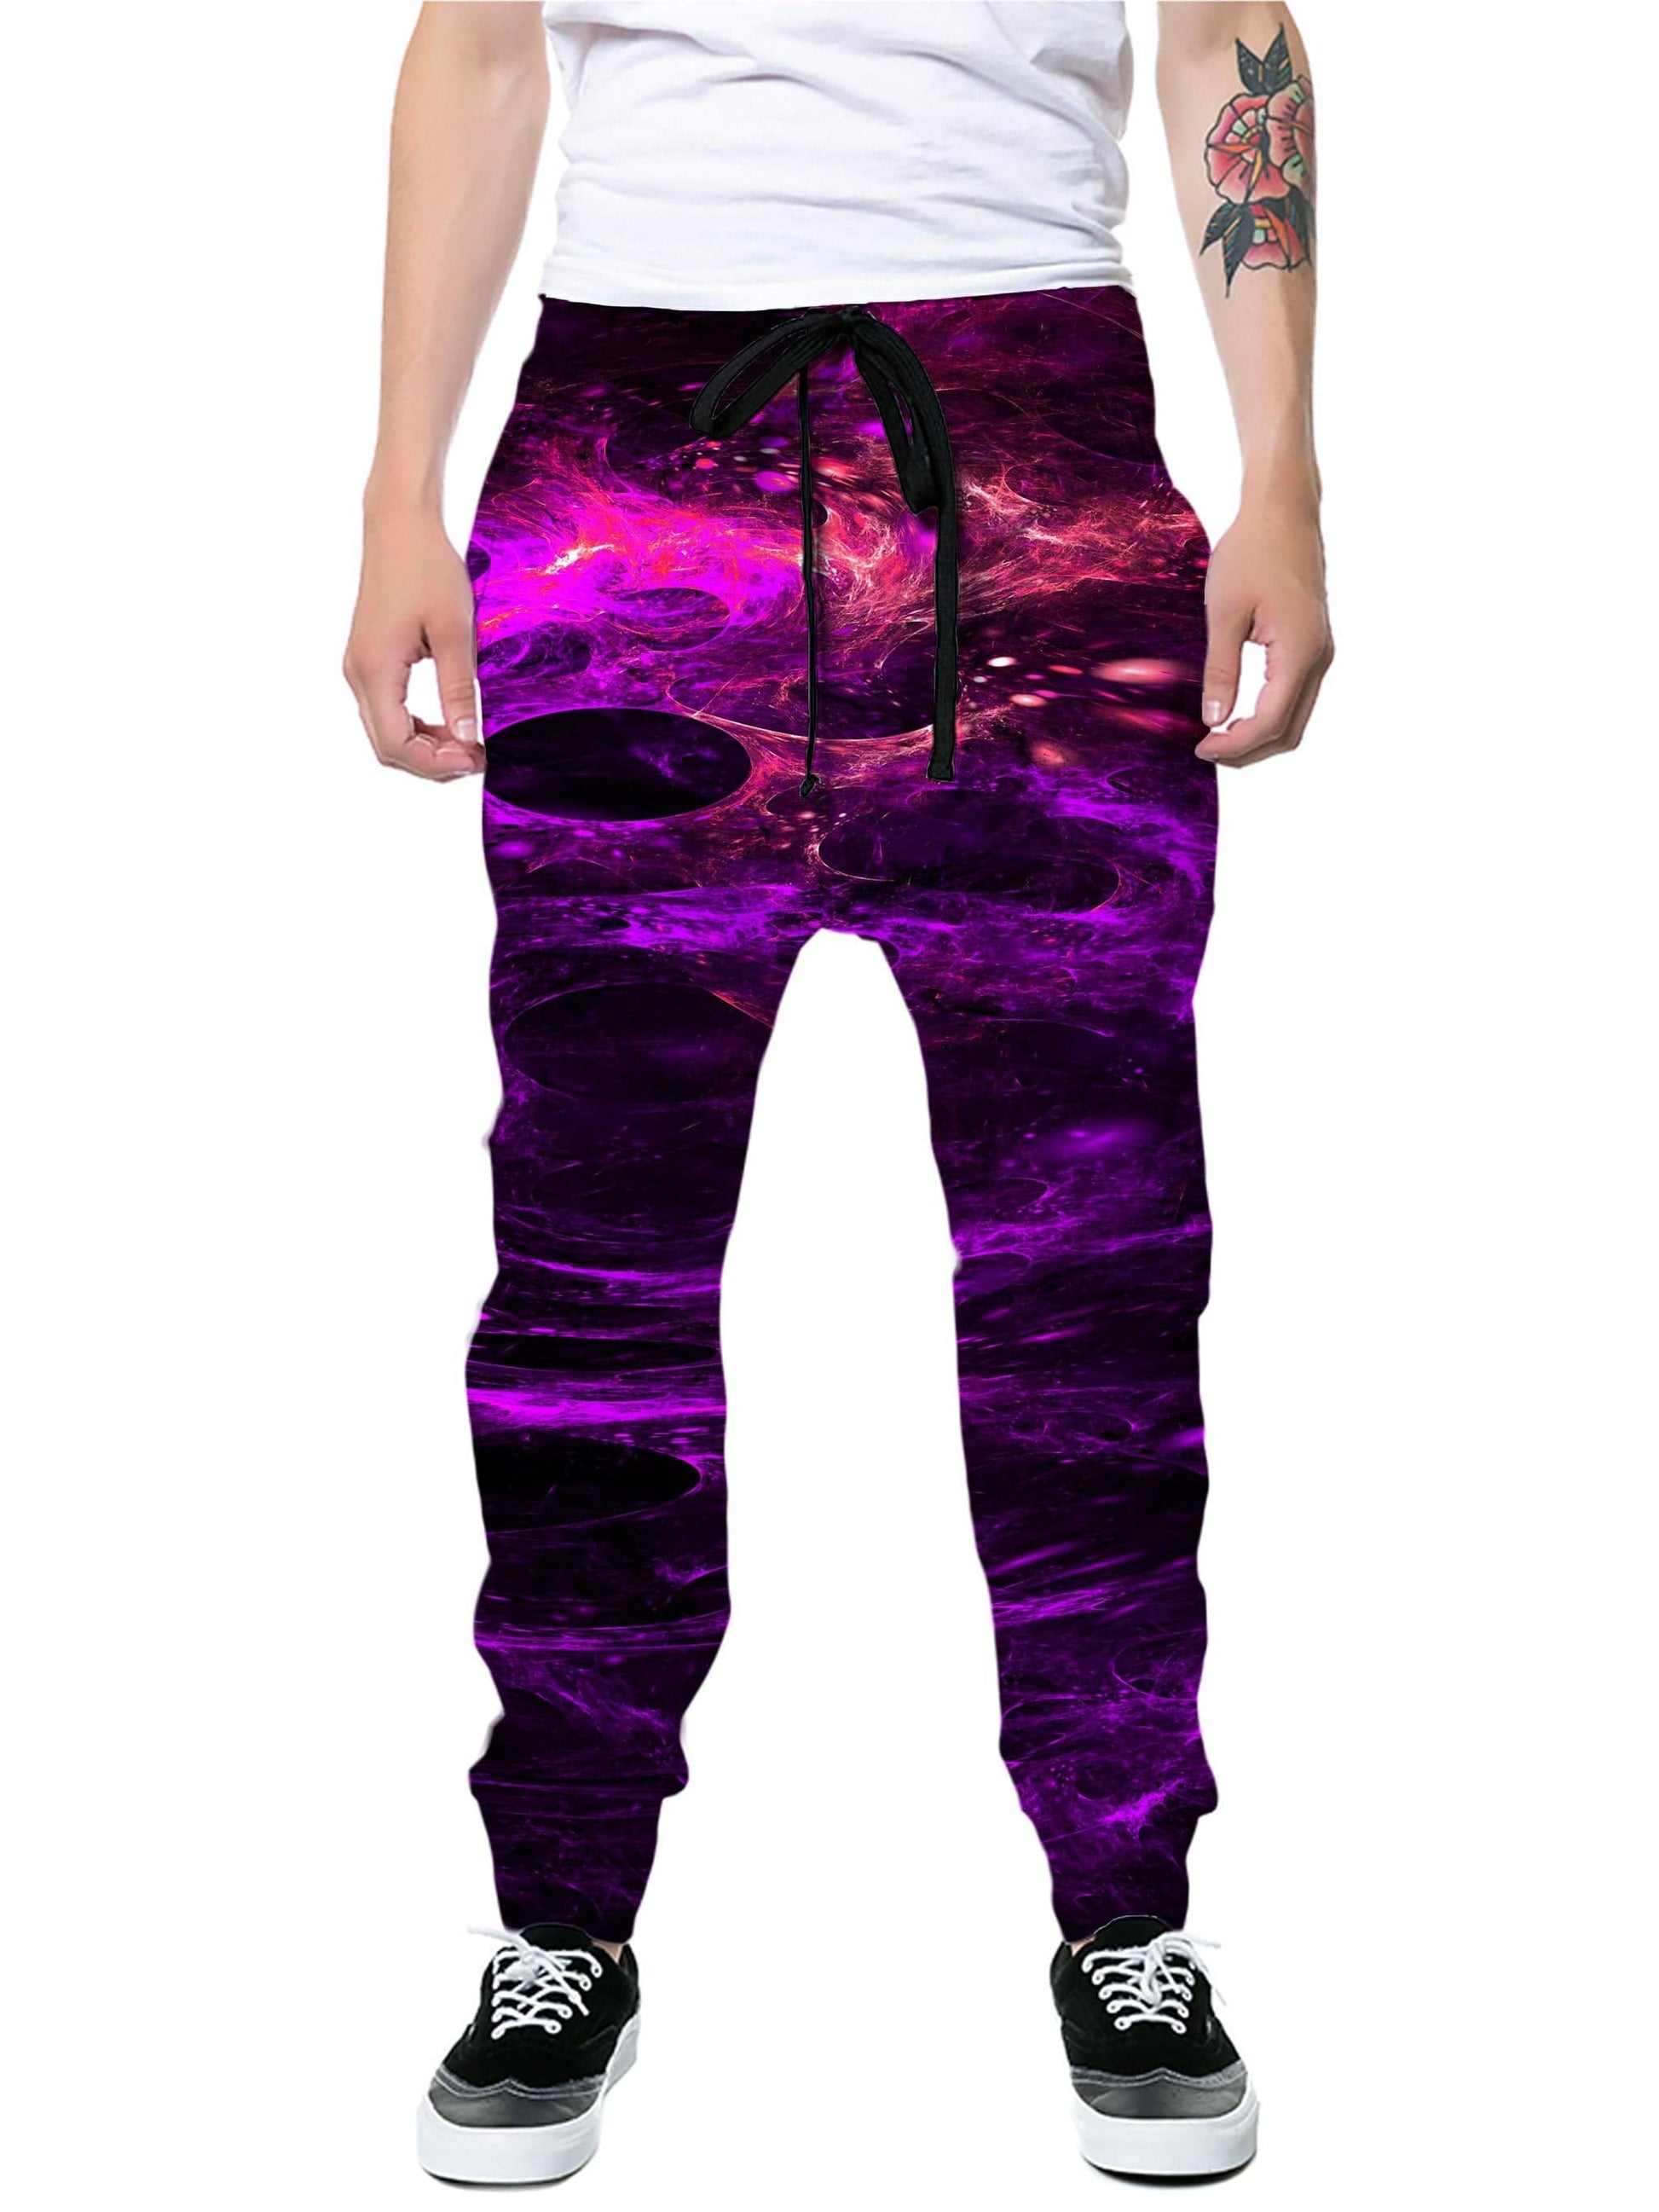 We Landed Joggers, Noctum X Truth, | iEDM